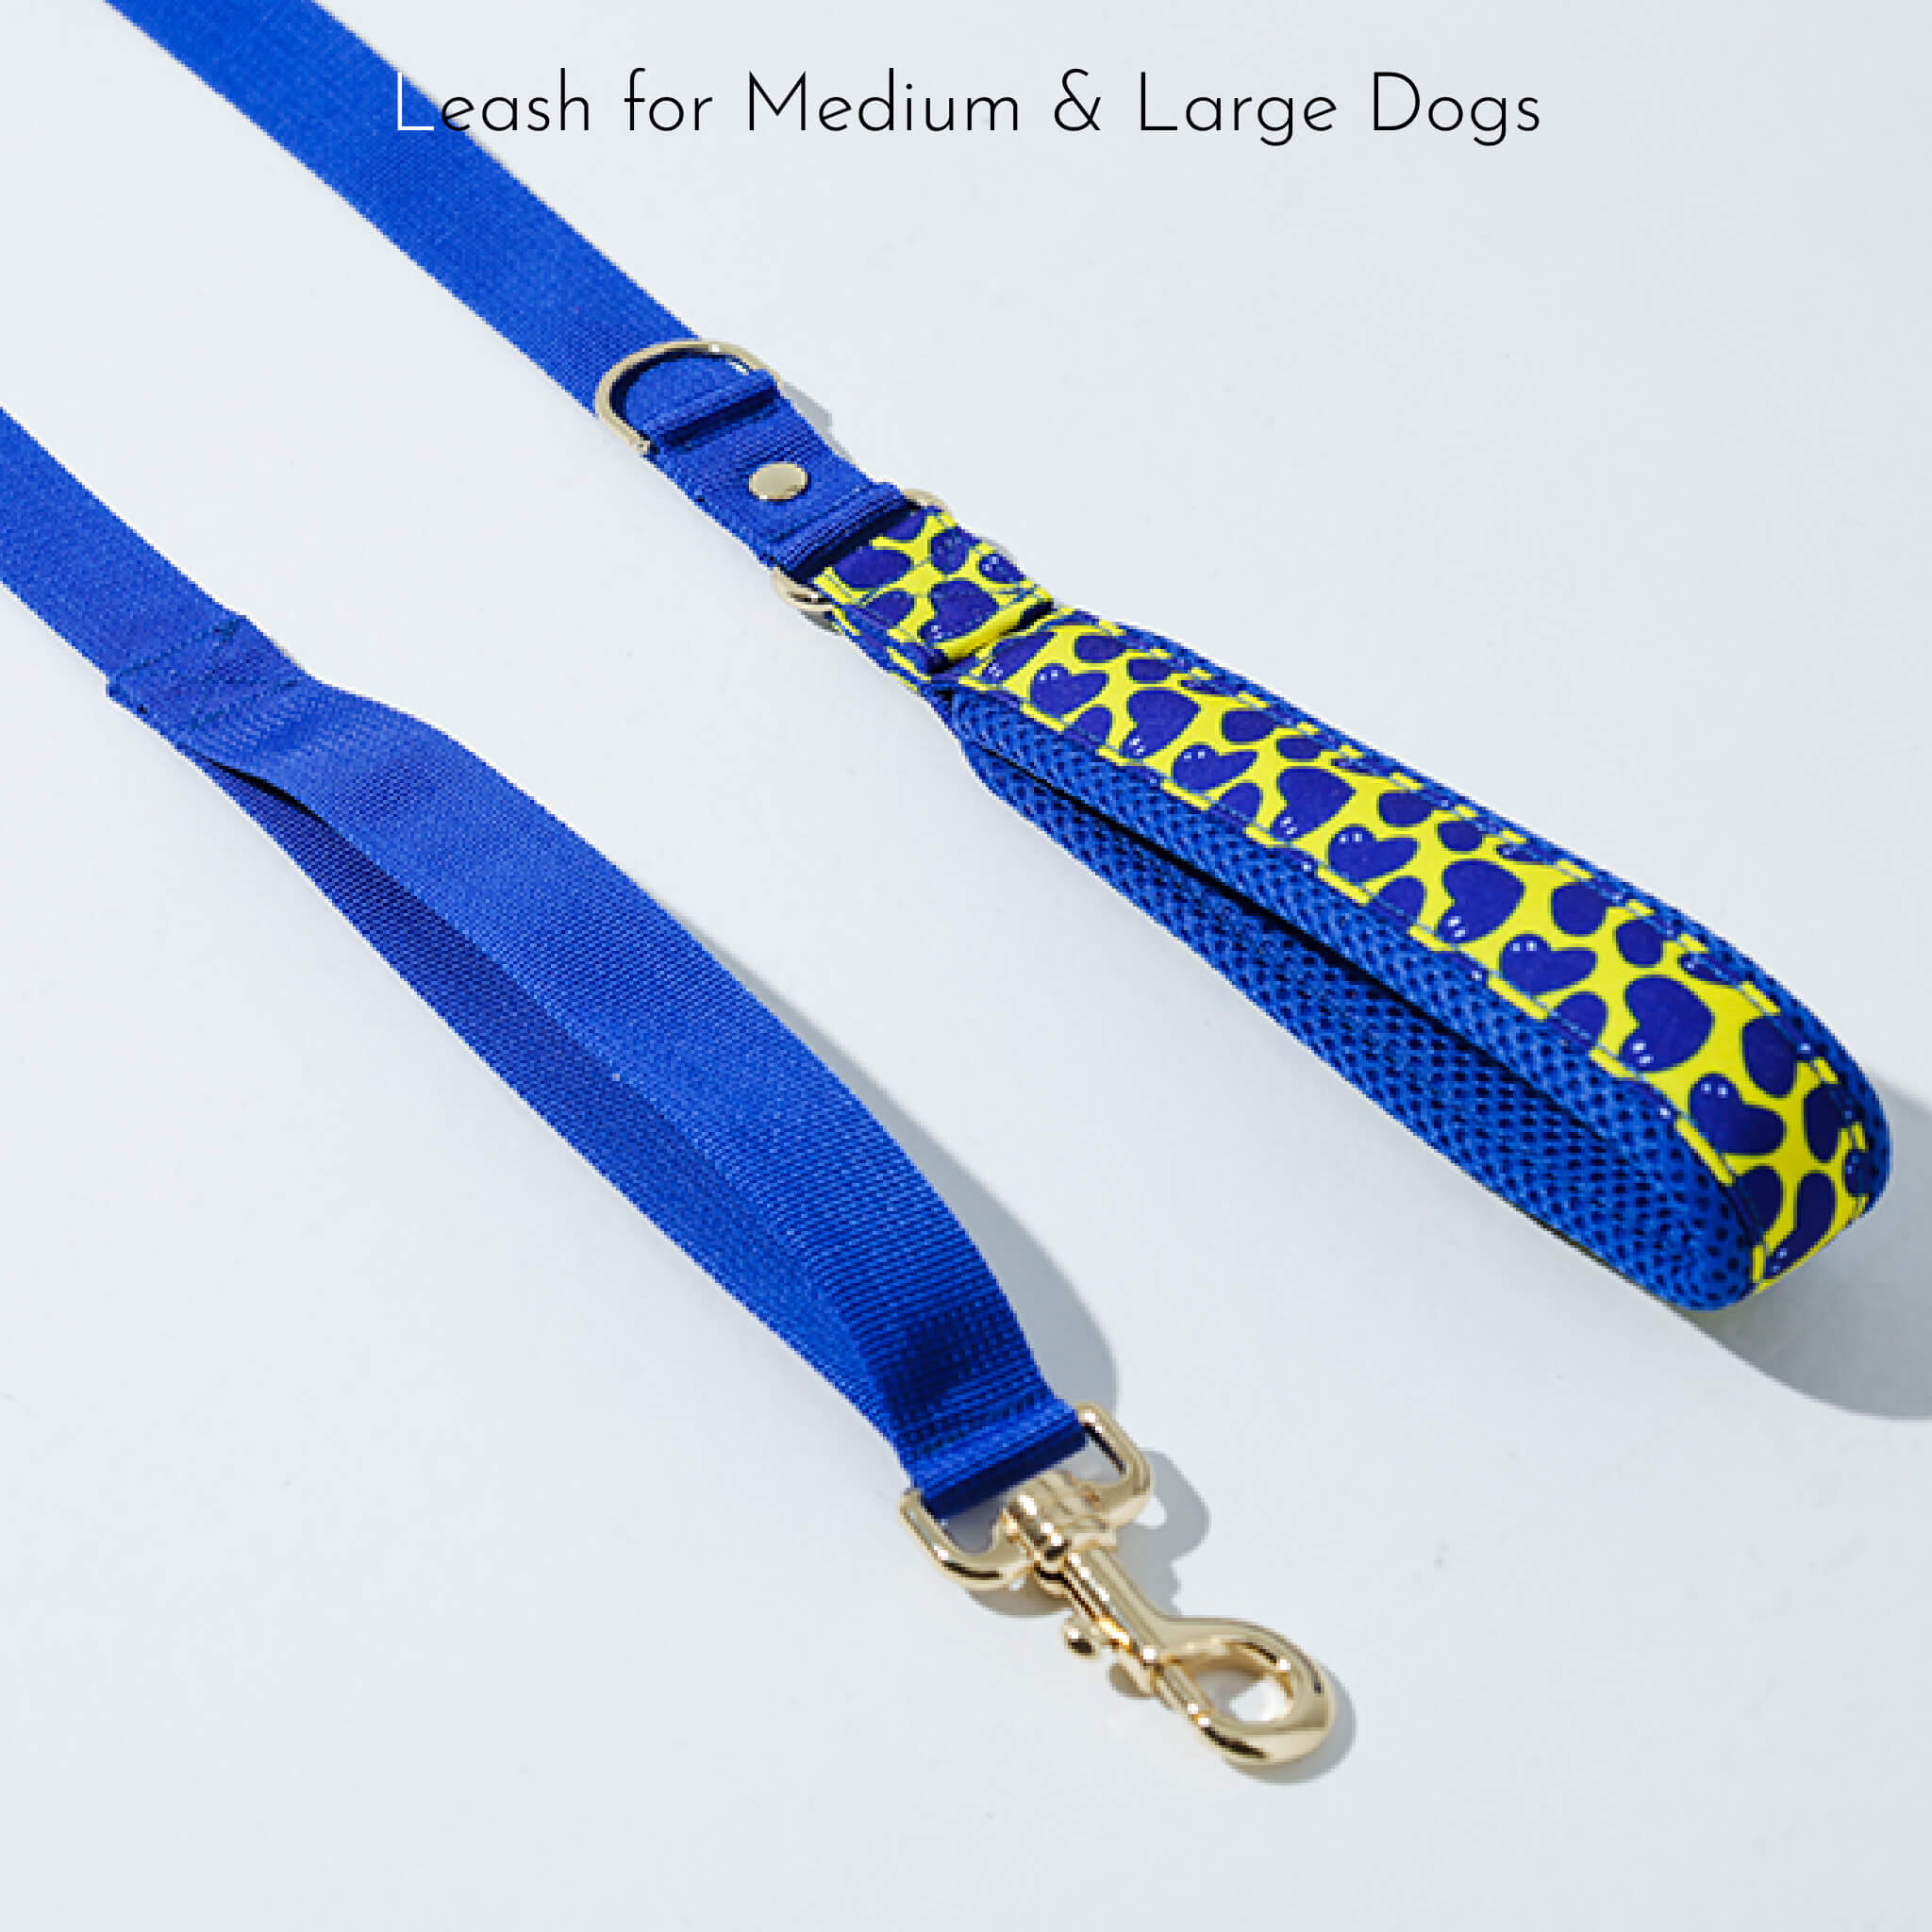 leash for medium & large dogs